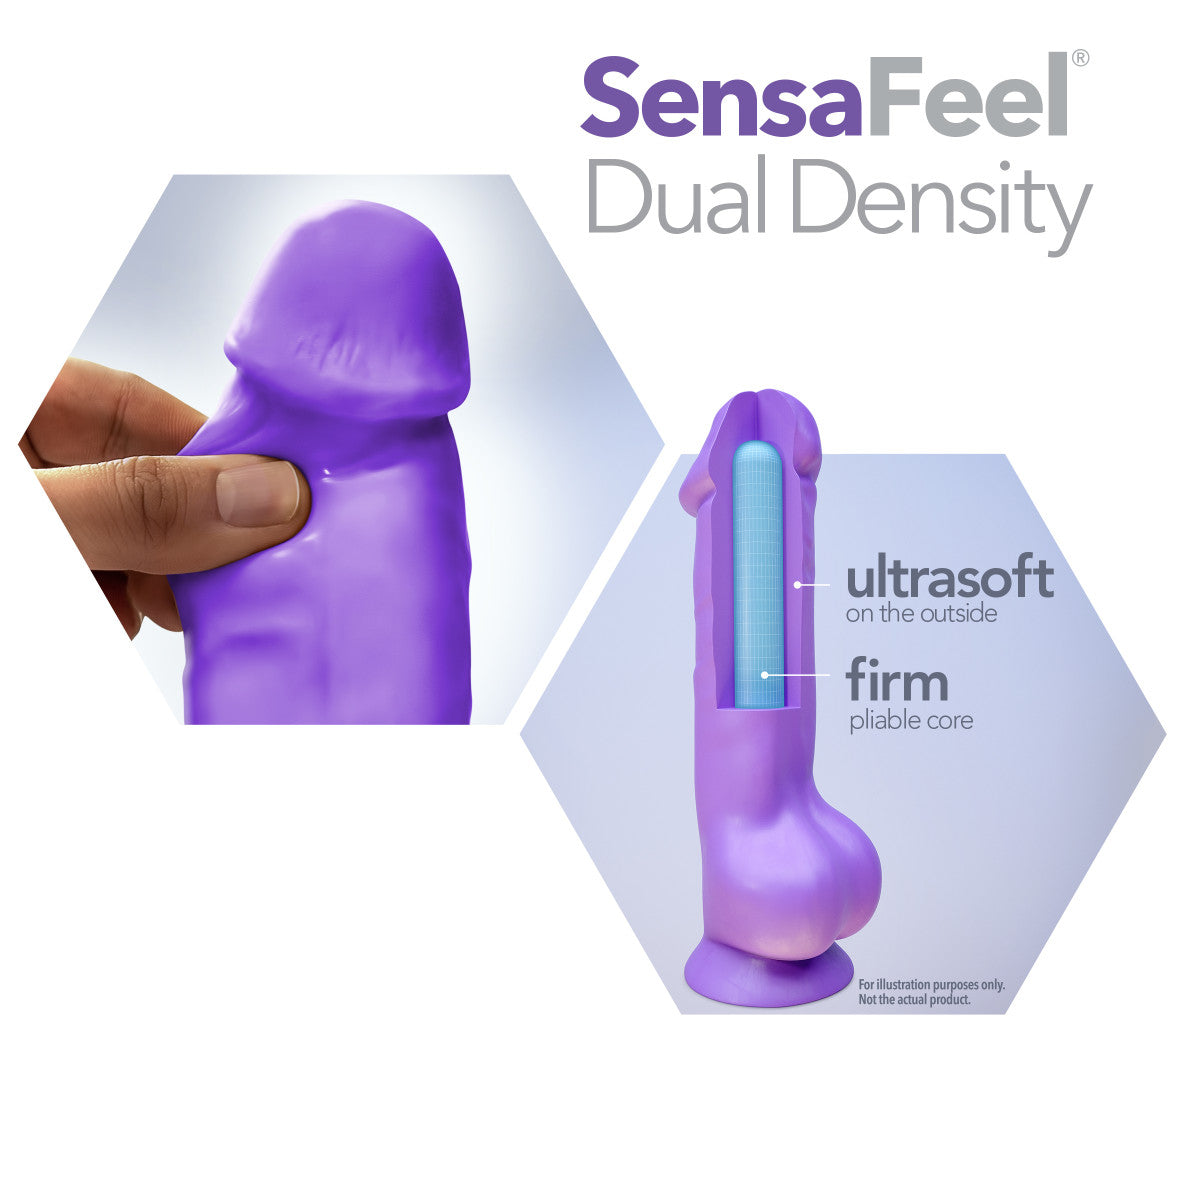 Pink realistic dildo featuring a slightly tapered head, veins along a straight but flexible shaft, and realistic balls. Suction cup base. Additional images show alternate angles.